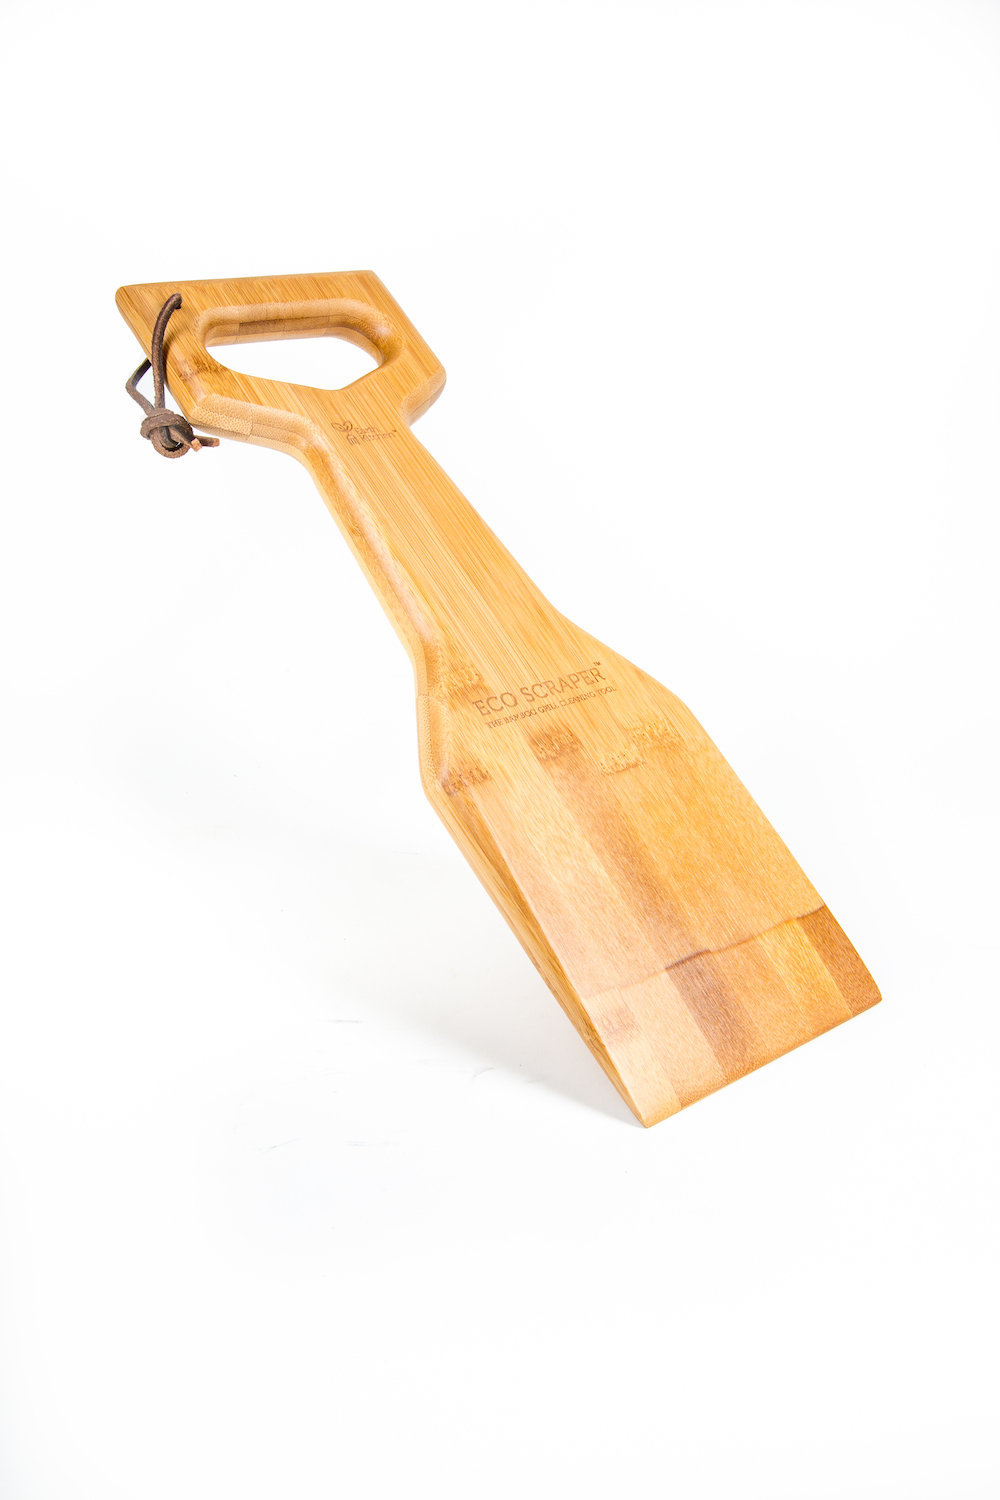 Bamboo Scraper - Product Photography - Frenchly - 4965